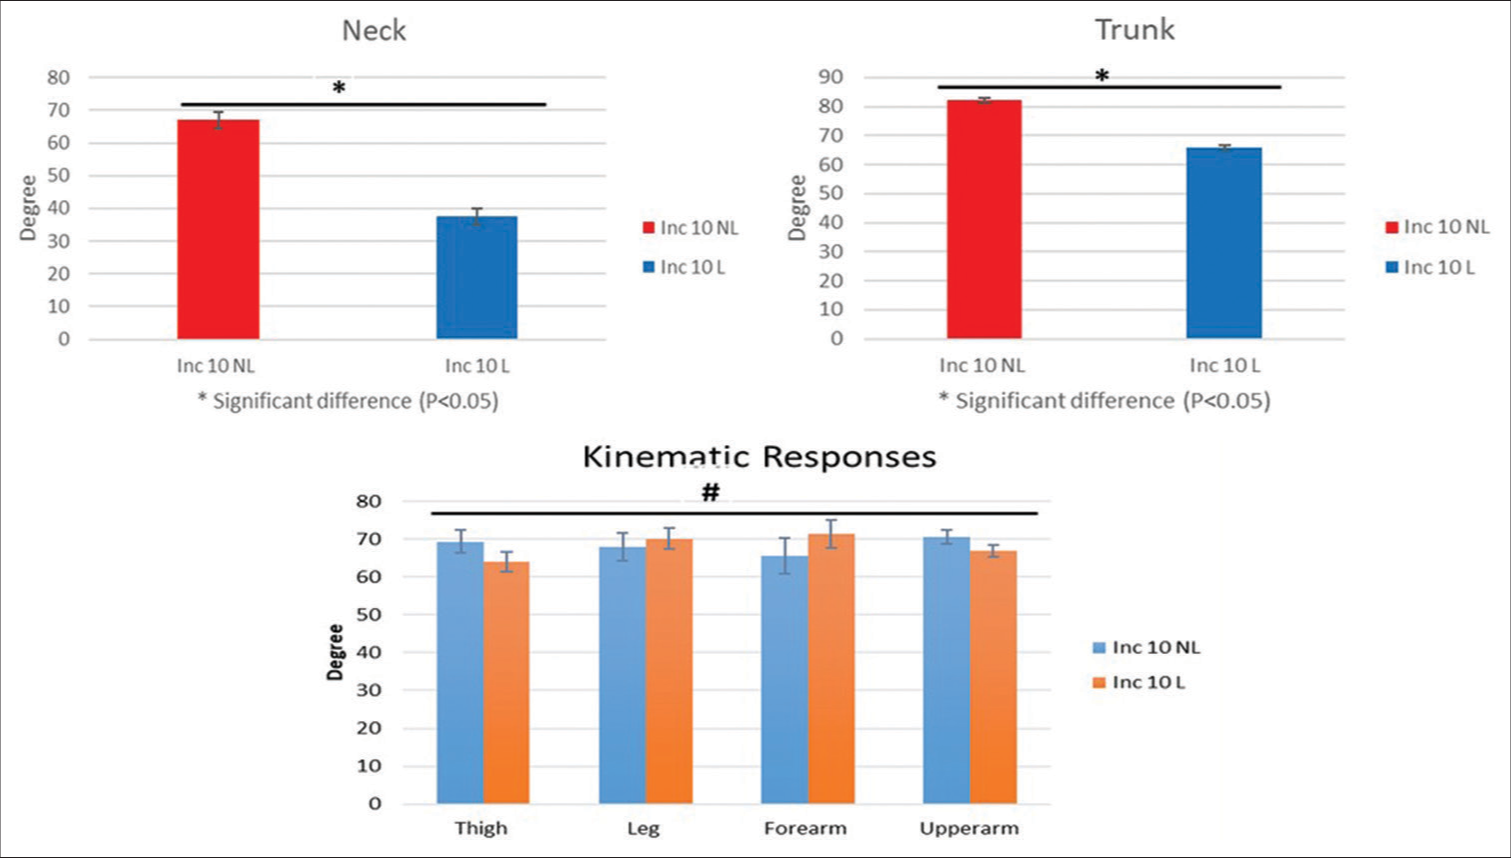 Graphical representation of kinematic responses during treadmill walking at 3.5 kmph with carrying load (30 kg) at 10° gradient. Inc.: Inclination, NL: No-load, L; Load. *Significant difference at 0.05 level. #No significant difference.